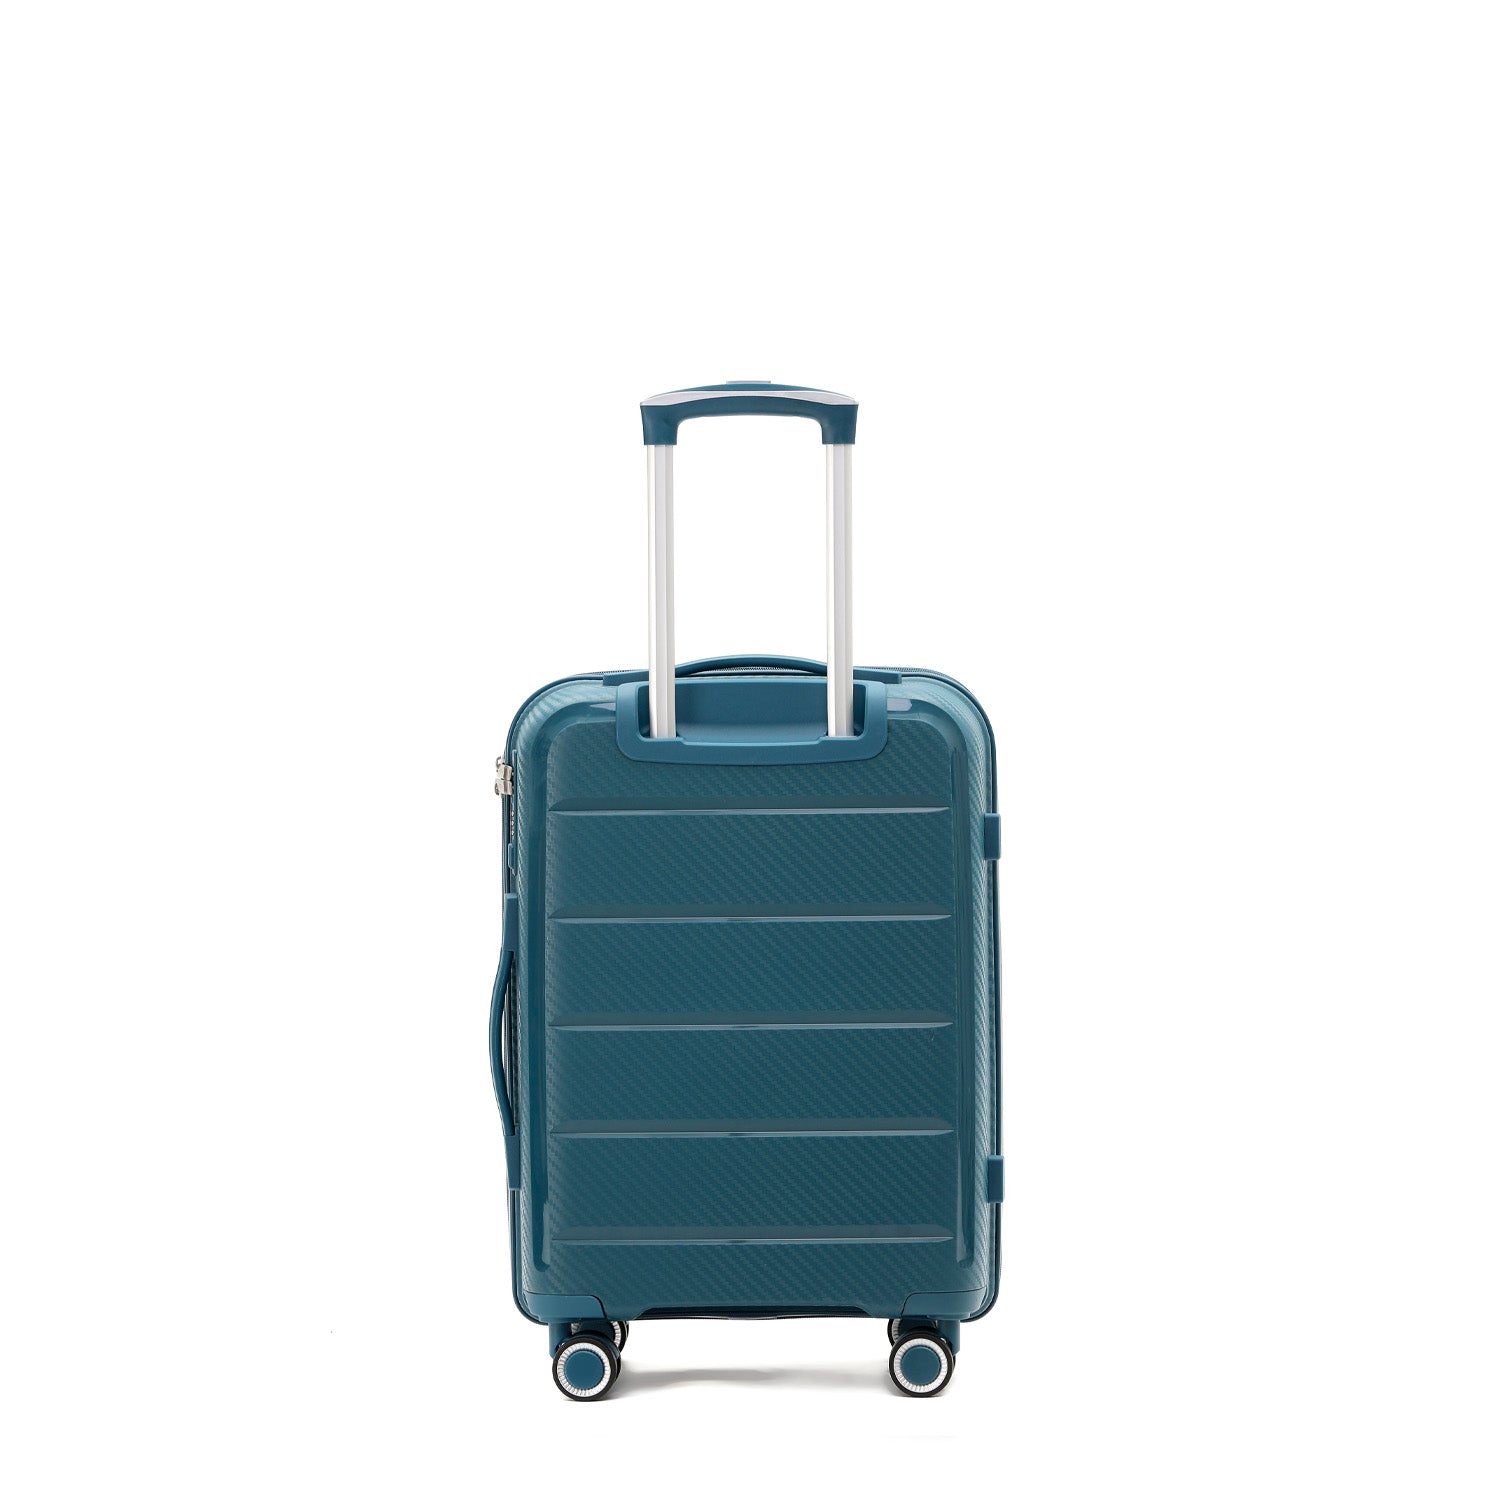 Paklite - PA7350 small spinner suitcase - Blue - 0